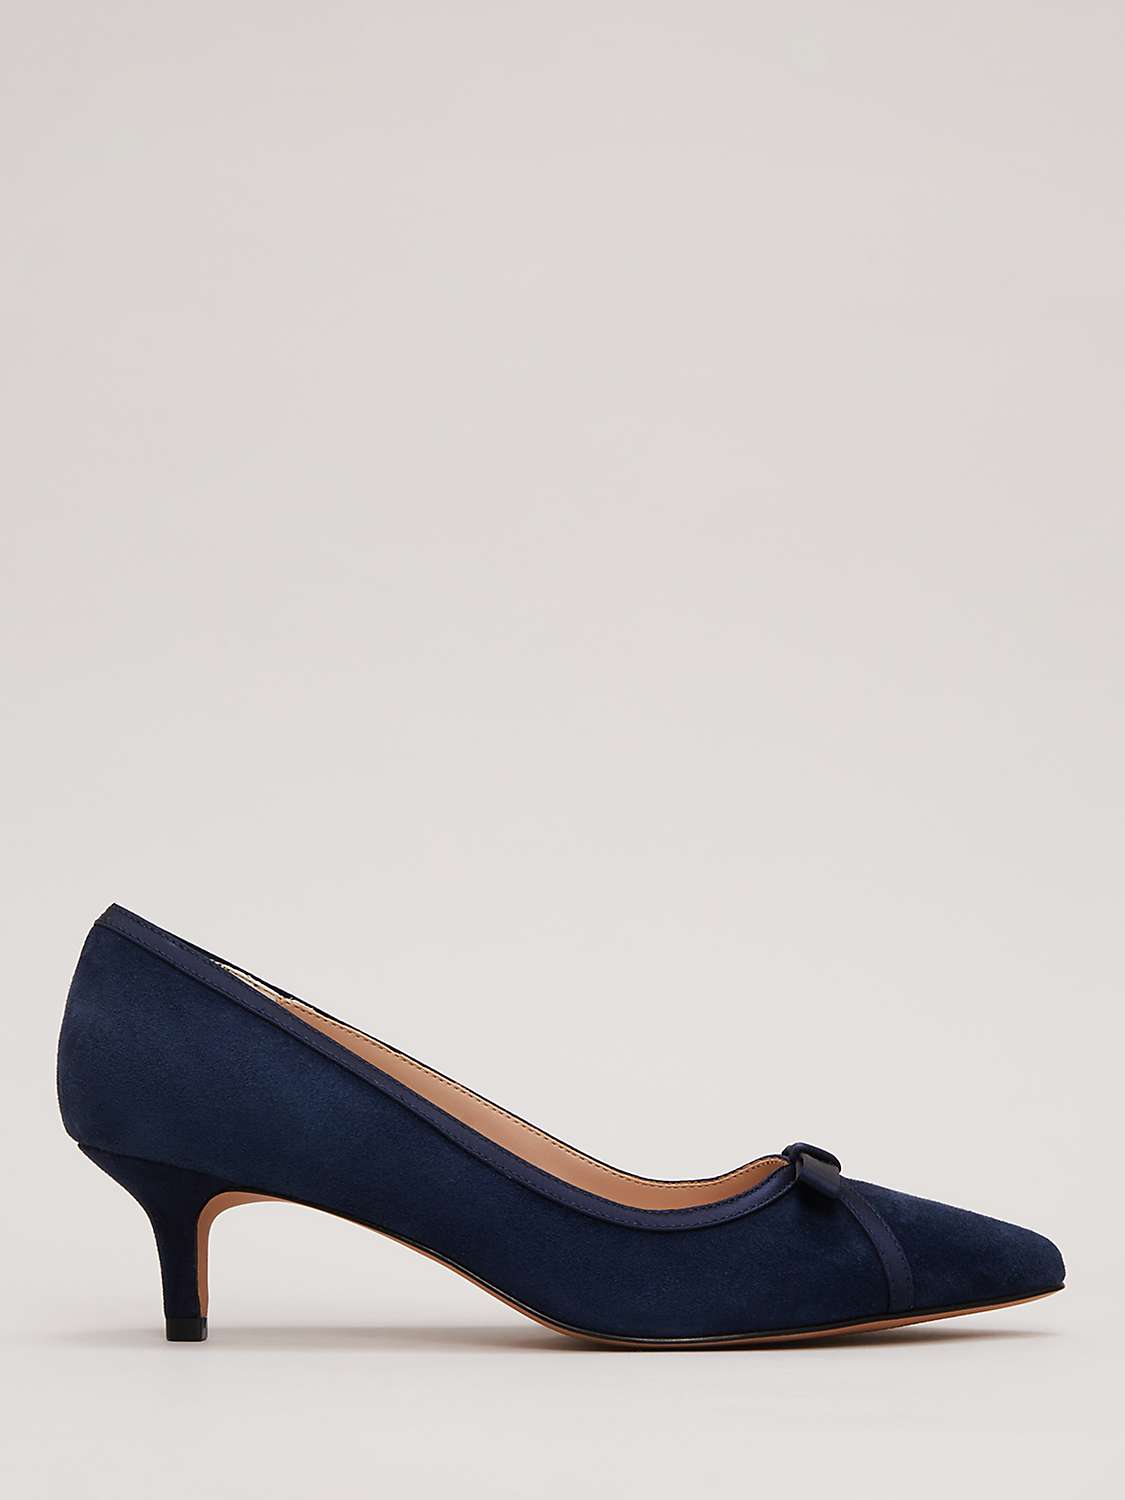 Buy Phase Eight Bow Kitten Heel Shoes Online at johnlewis.com